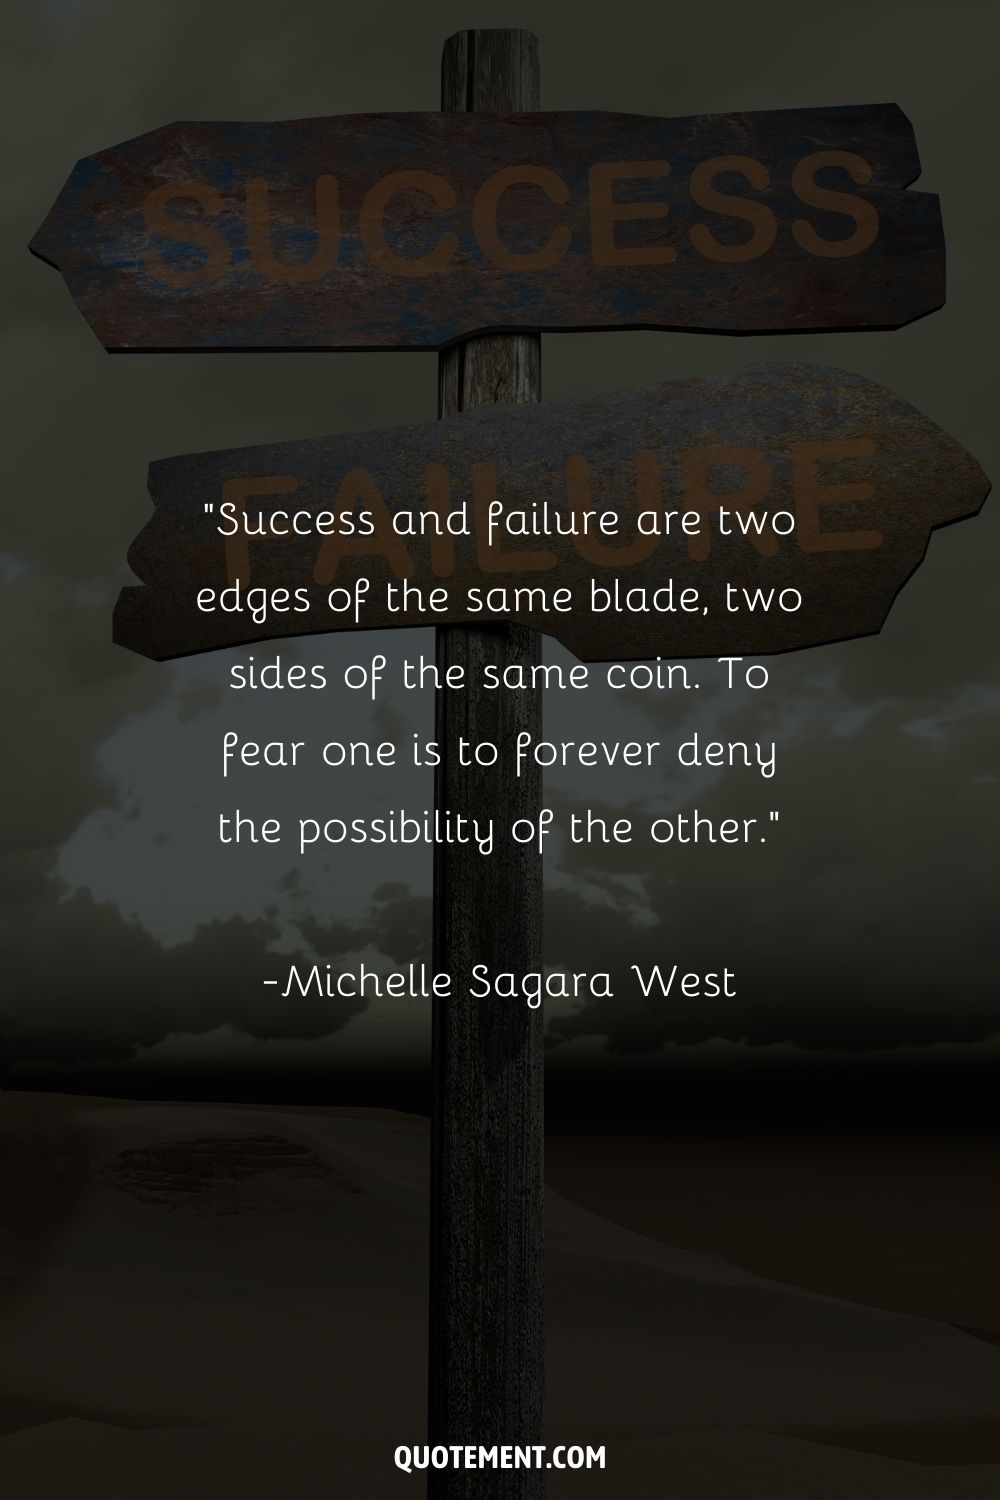 “Success and failure are two edges of the same blade, two sides of the same coin. To fear one is to forever deny the possibility of the other.